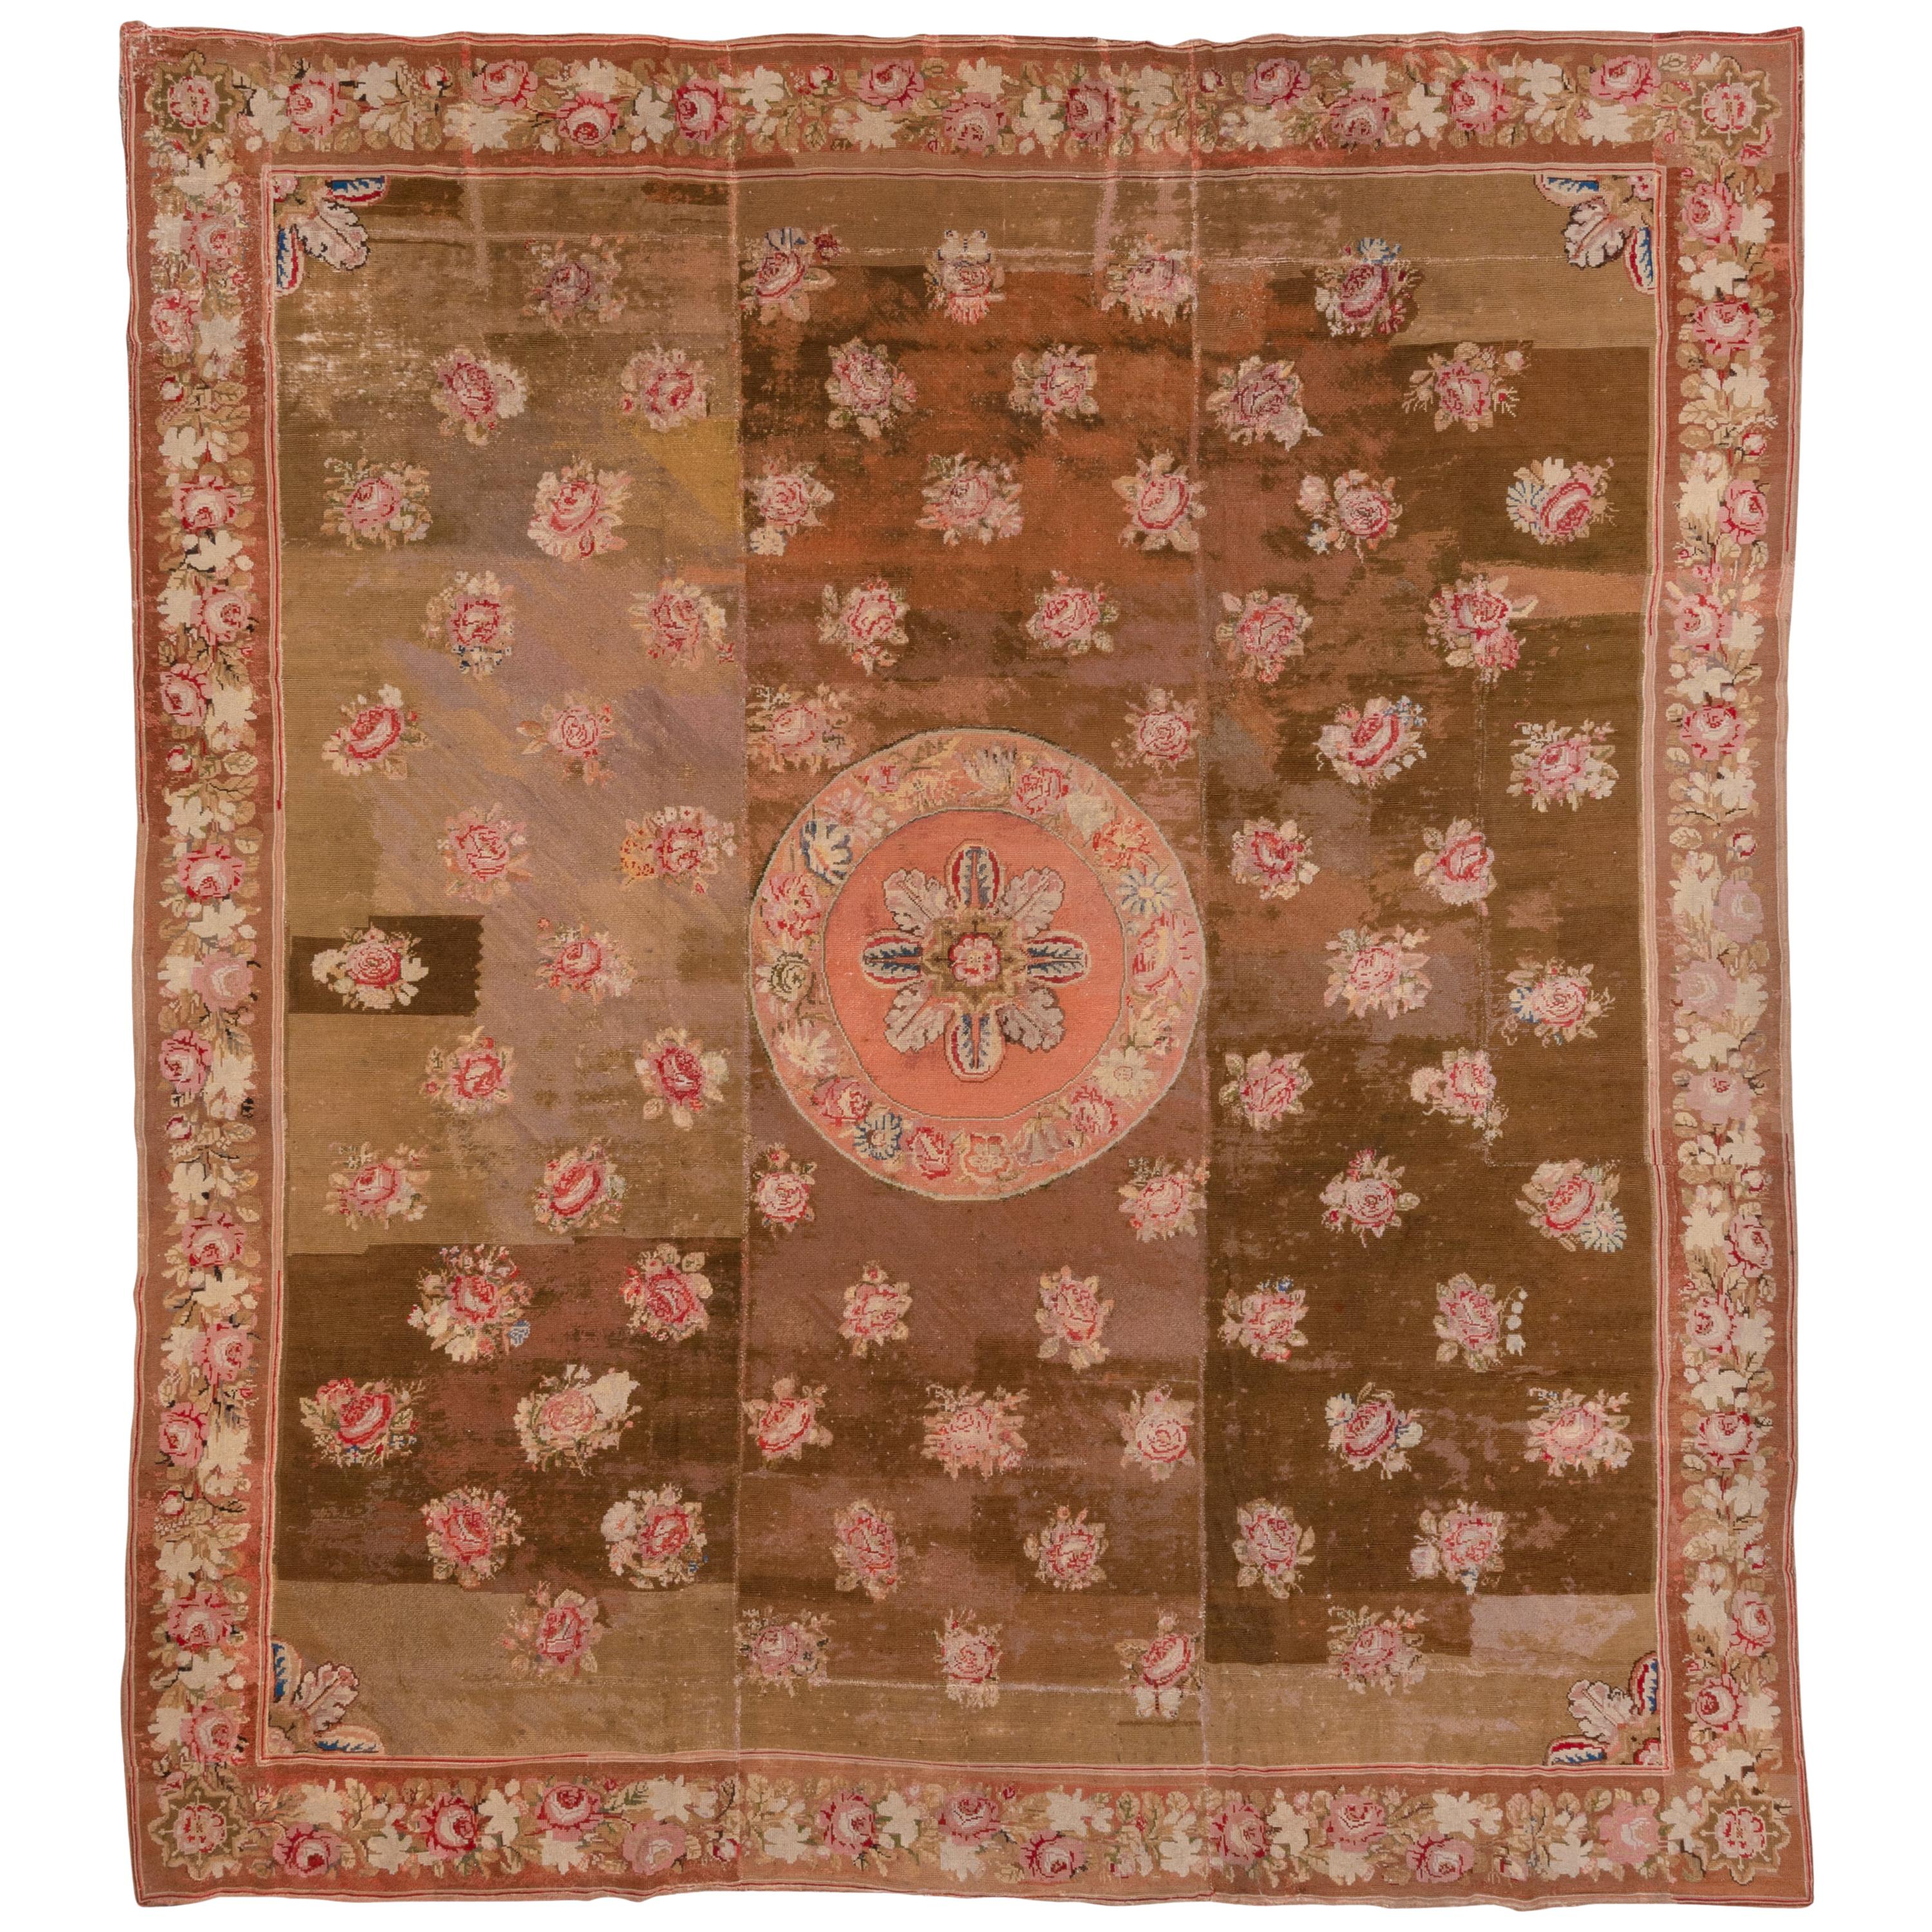 Antique French Needlepoint Carpet, Brown Field, Pink Borders